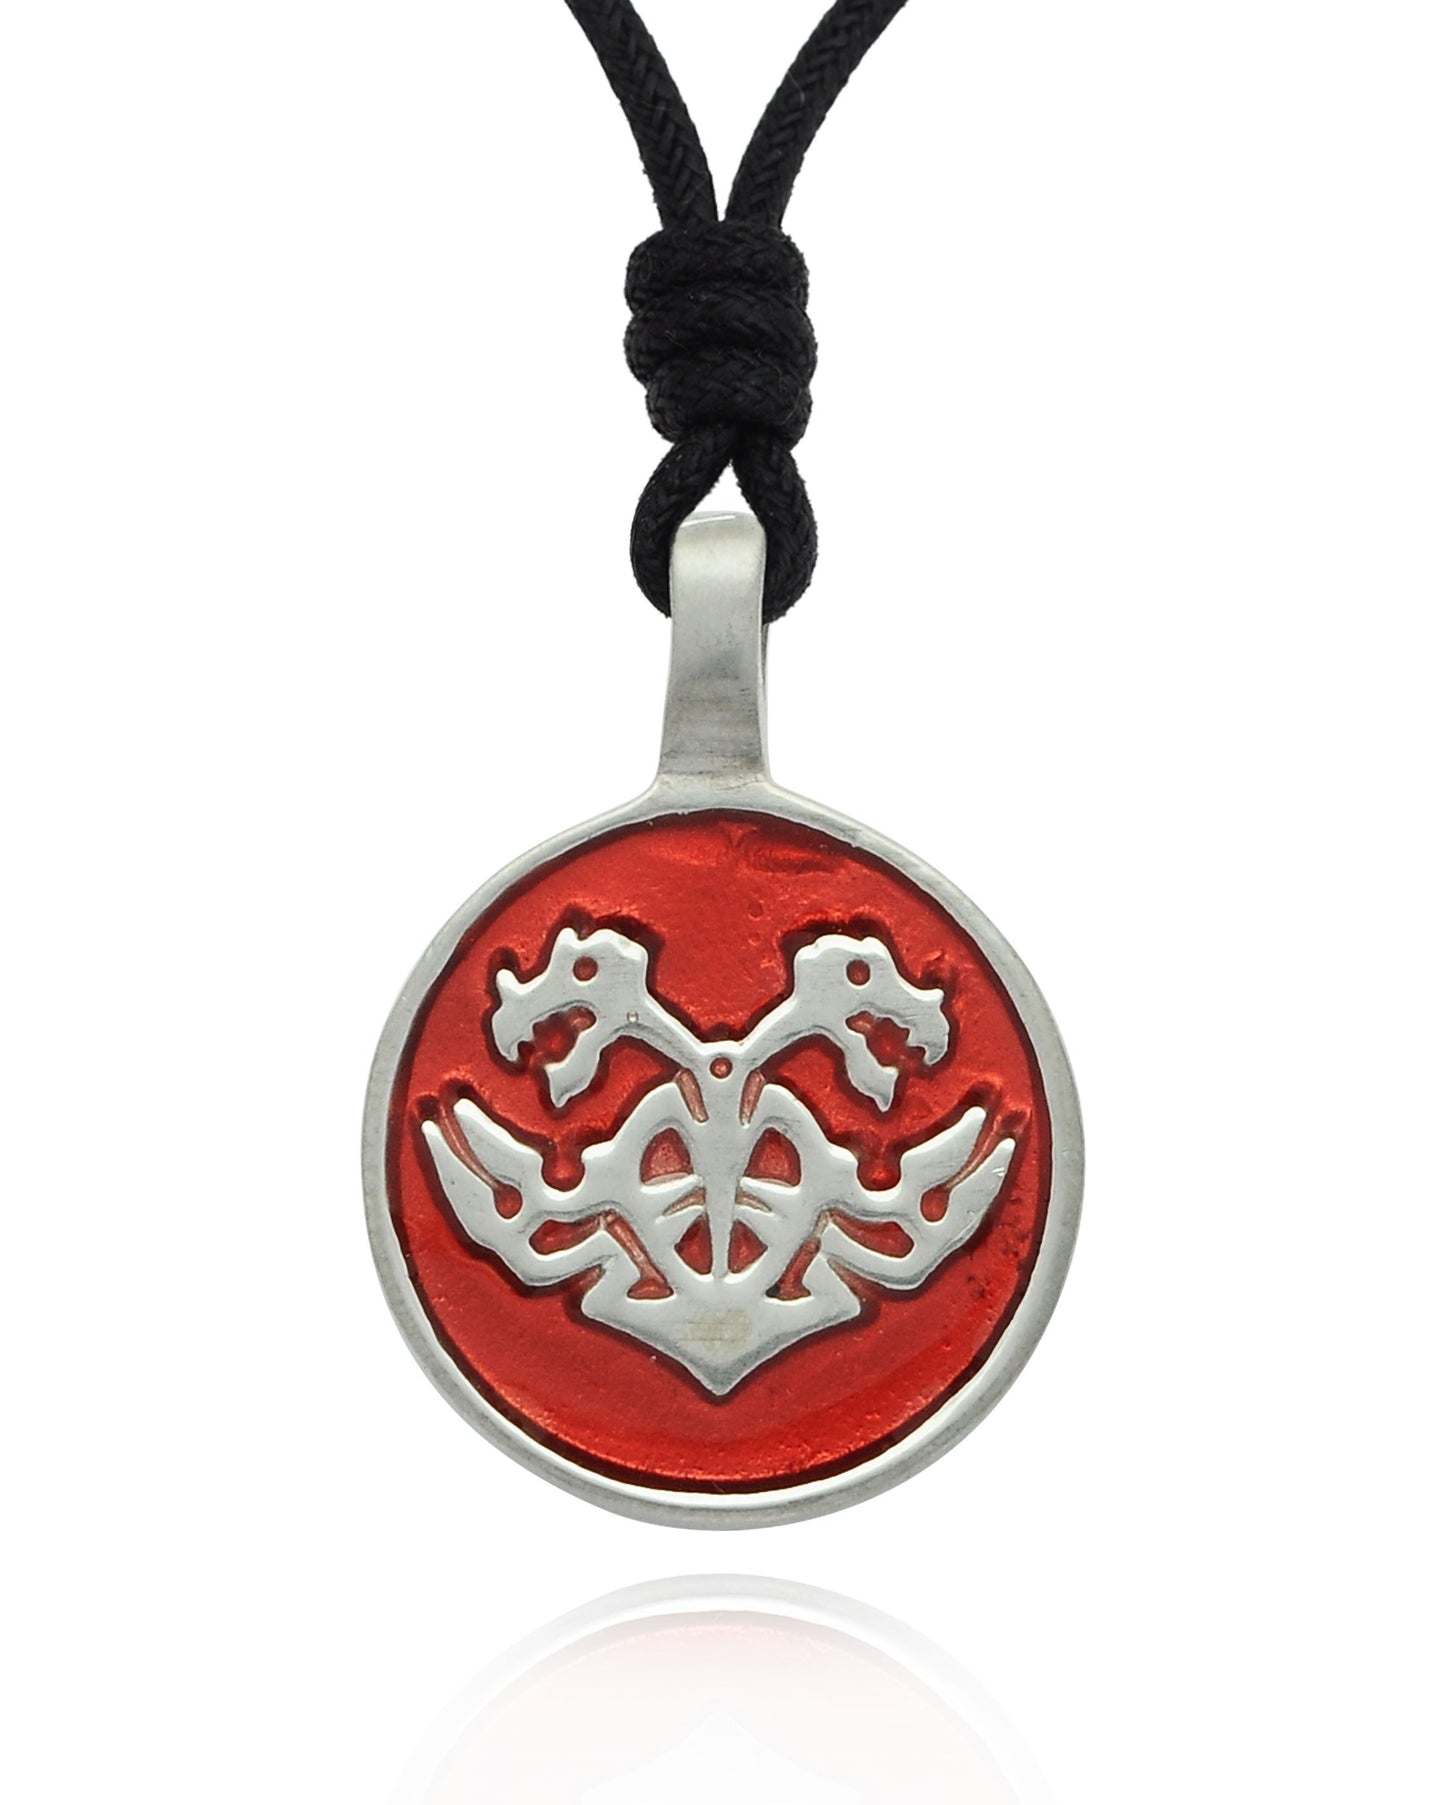 Colorful Dragon Crest Amulet Silver Pewter Charm Necklace Pendant Jewelry